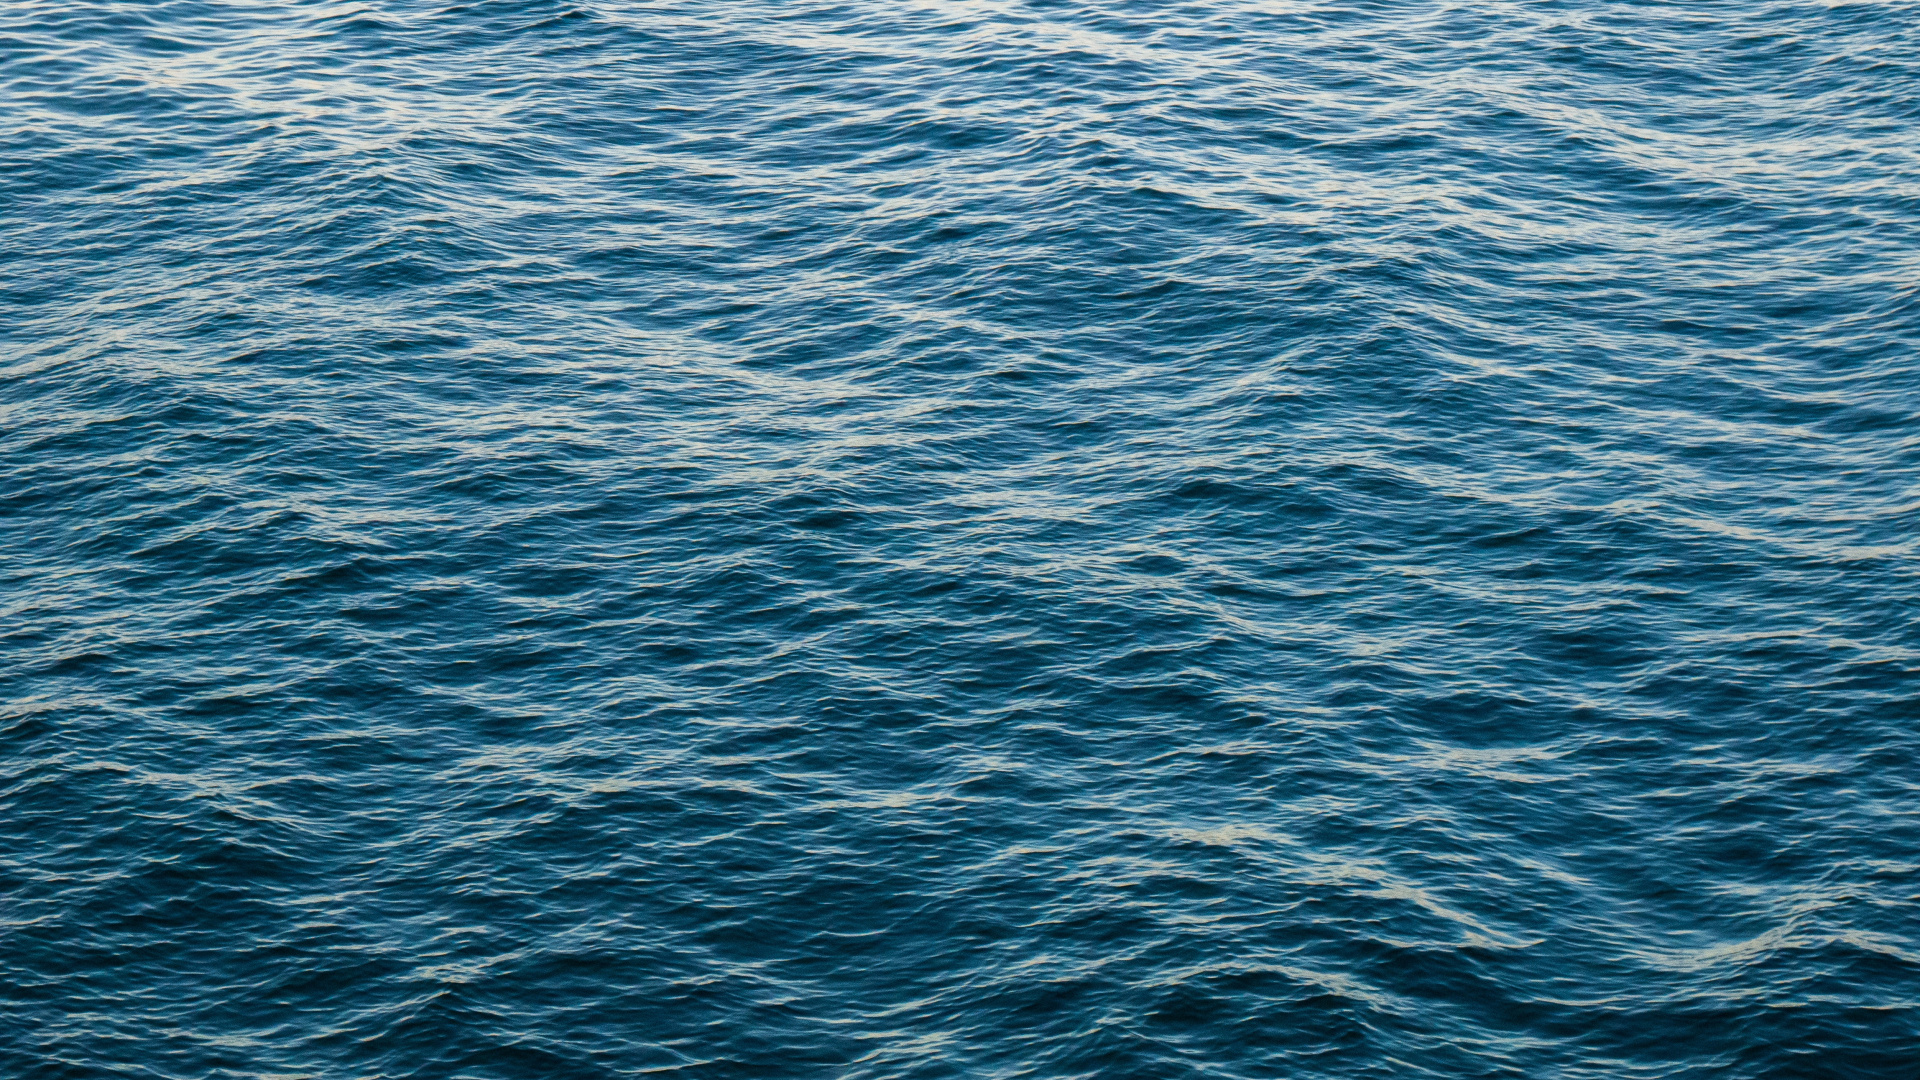 Blue Body of Water During Daytime. Wallpaper in 1920x1080 Resolution